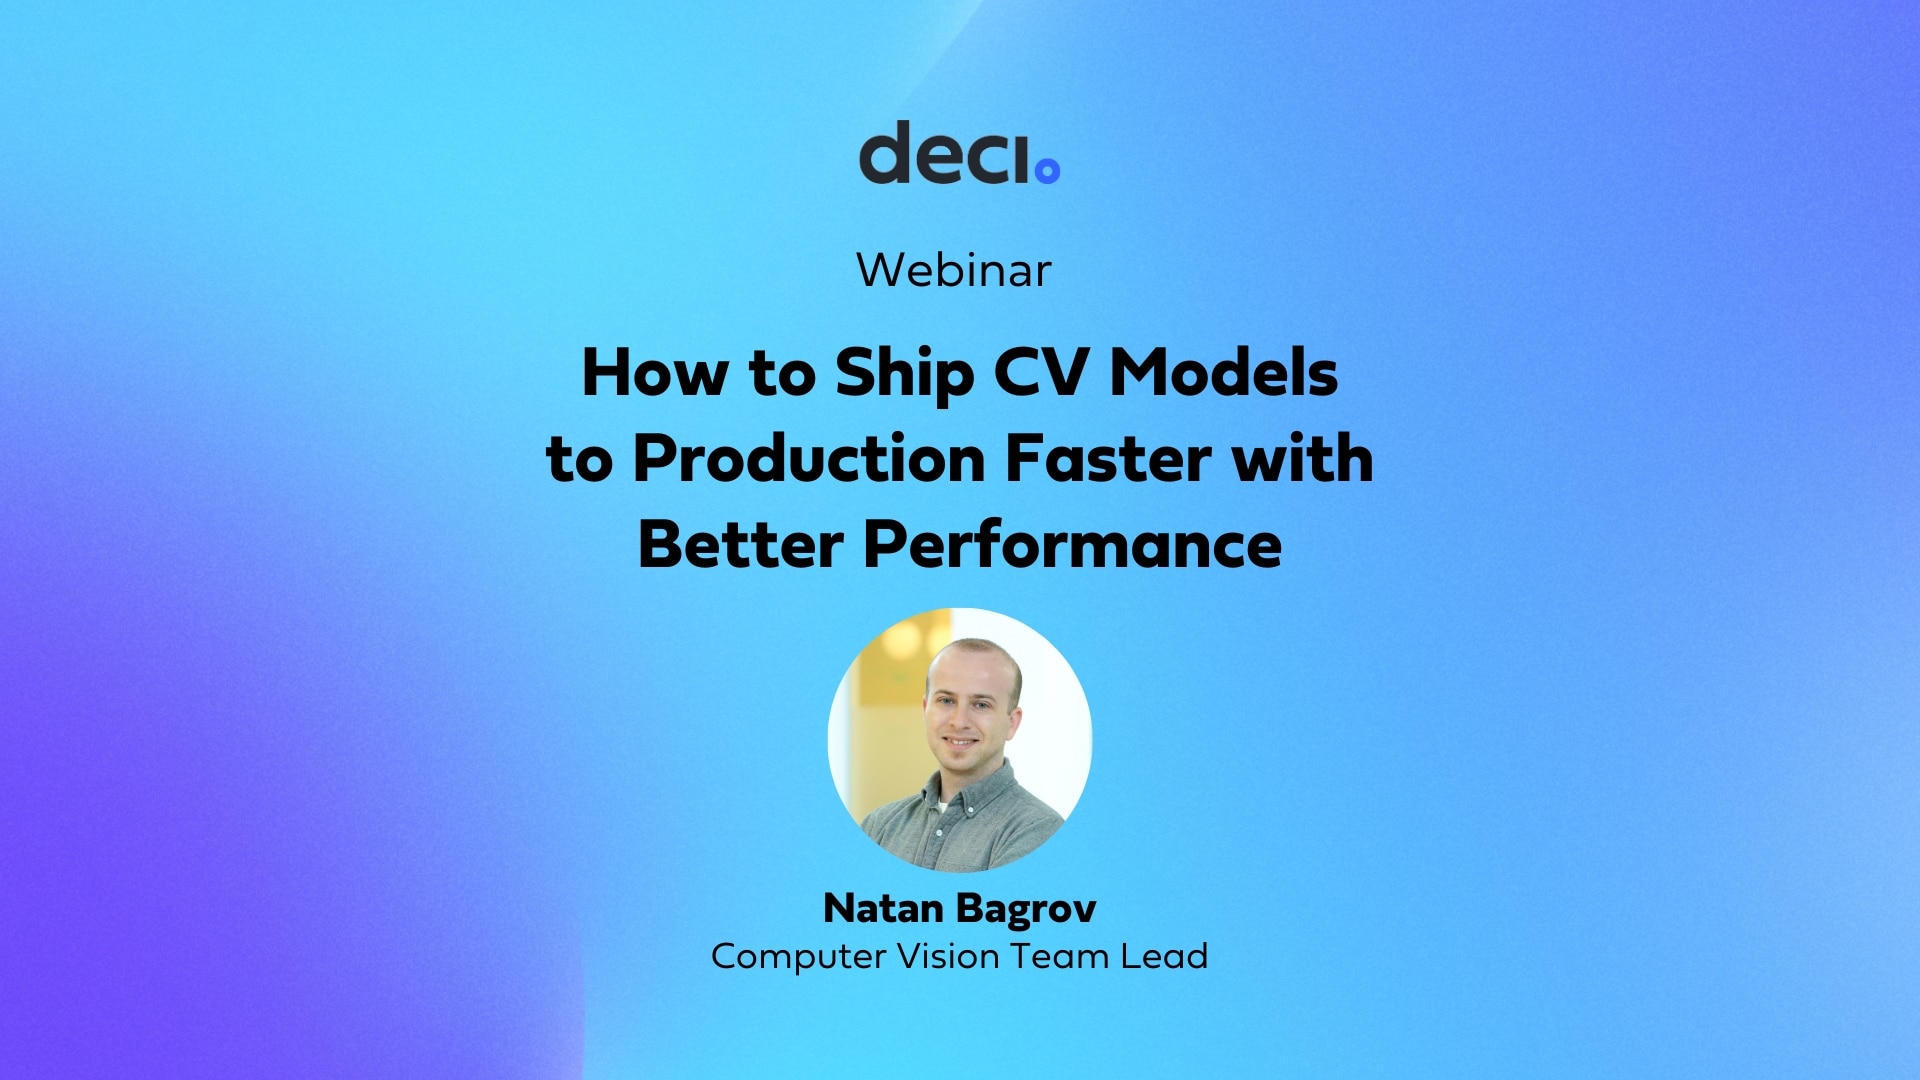 how-to-ship-DL-models-to-production-faster-with-better-performance-featured